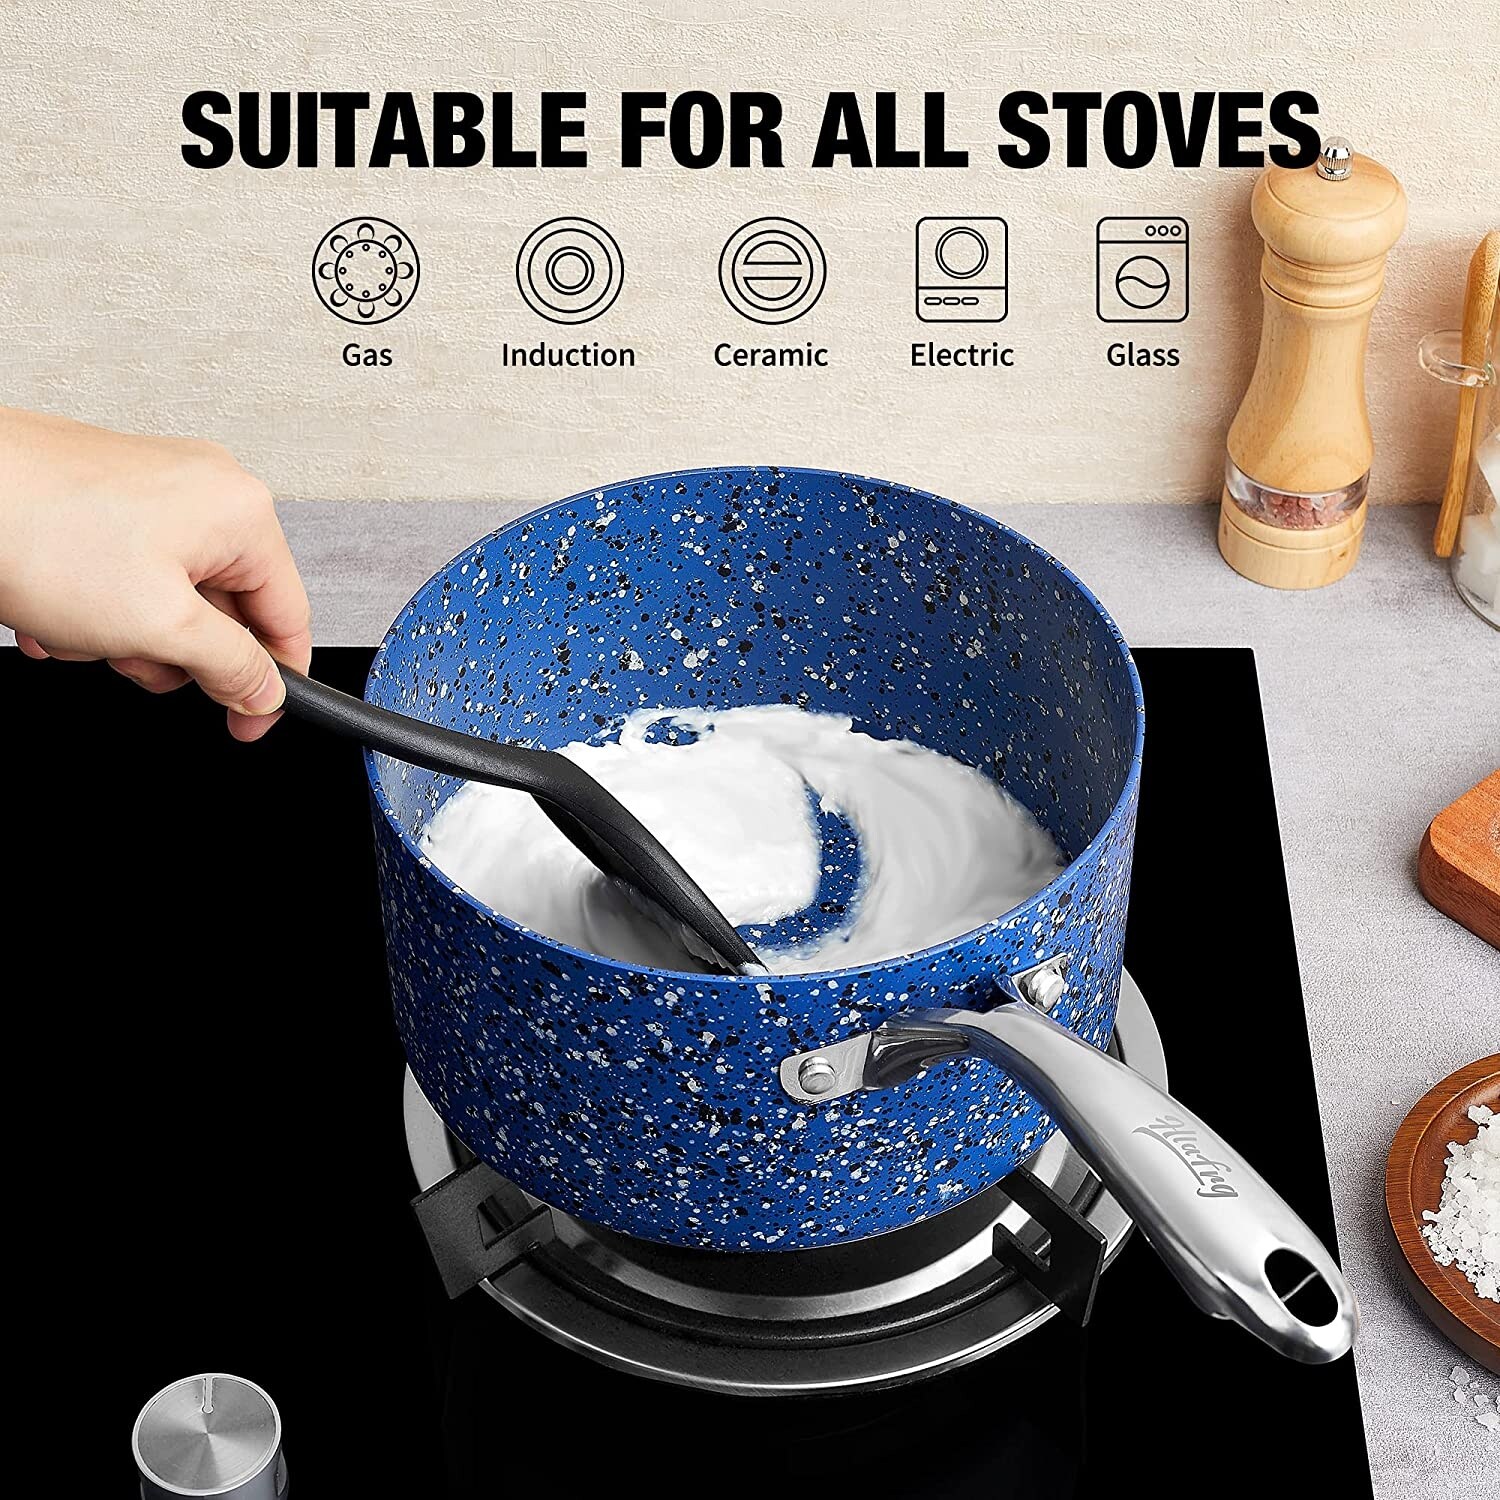 Kitchen Cookware Set, 3 Piece Saucepan Set with Glass Lids, Natural Durable  Granite Coating, Nonstick Sauce Pan Set, Durable & Oven Safe to 450°F